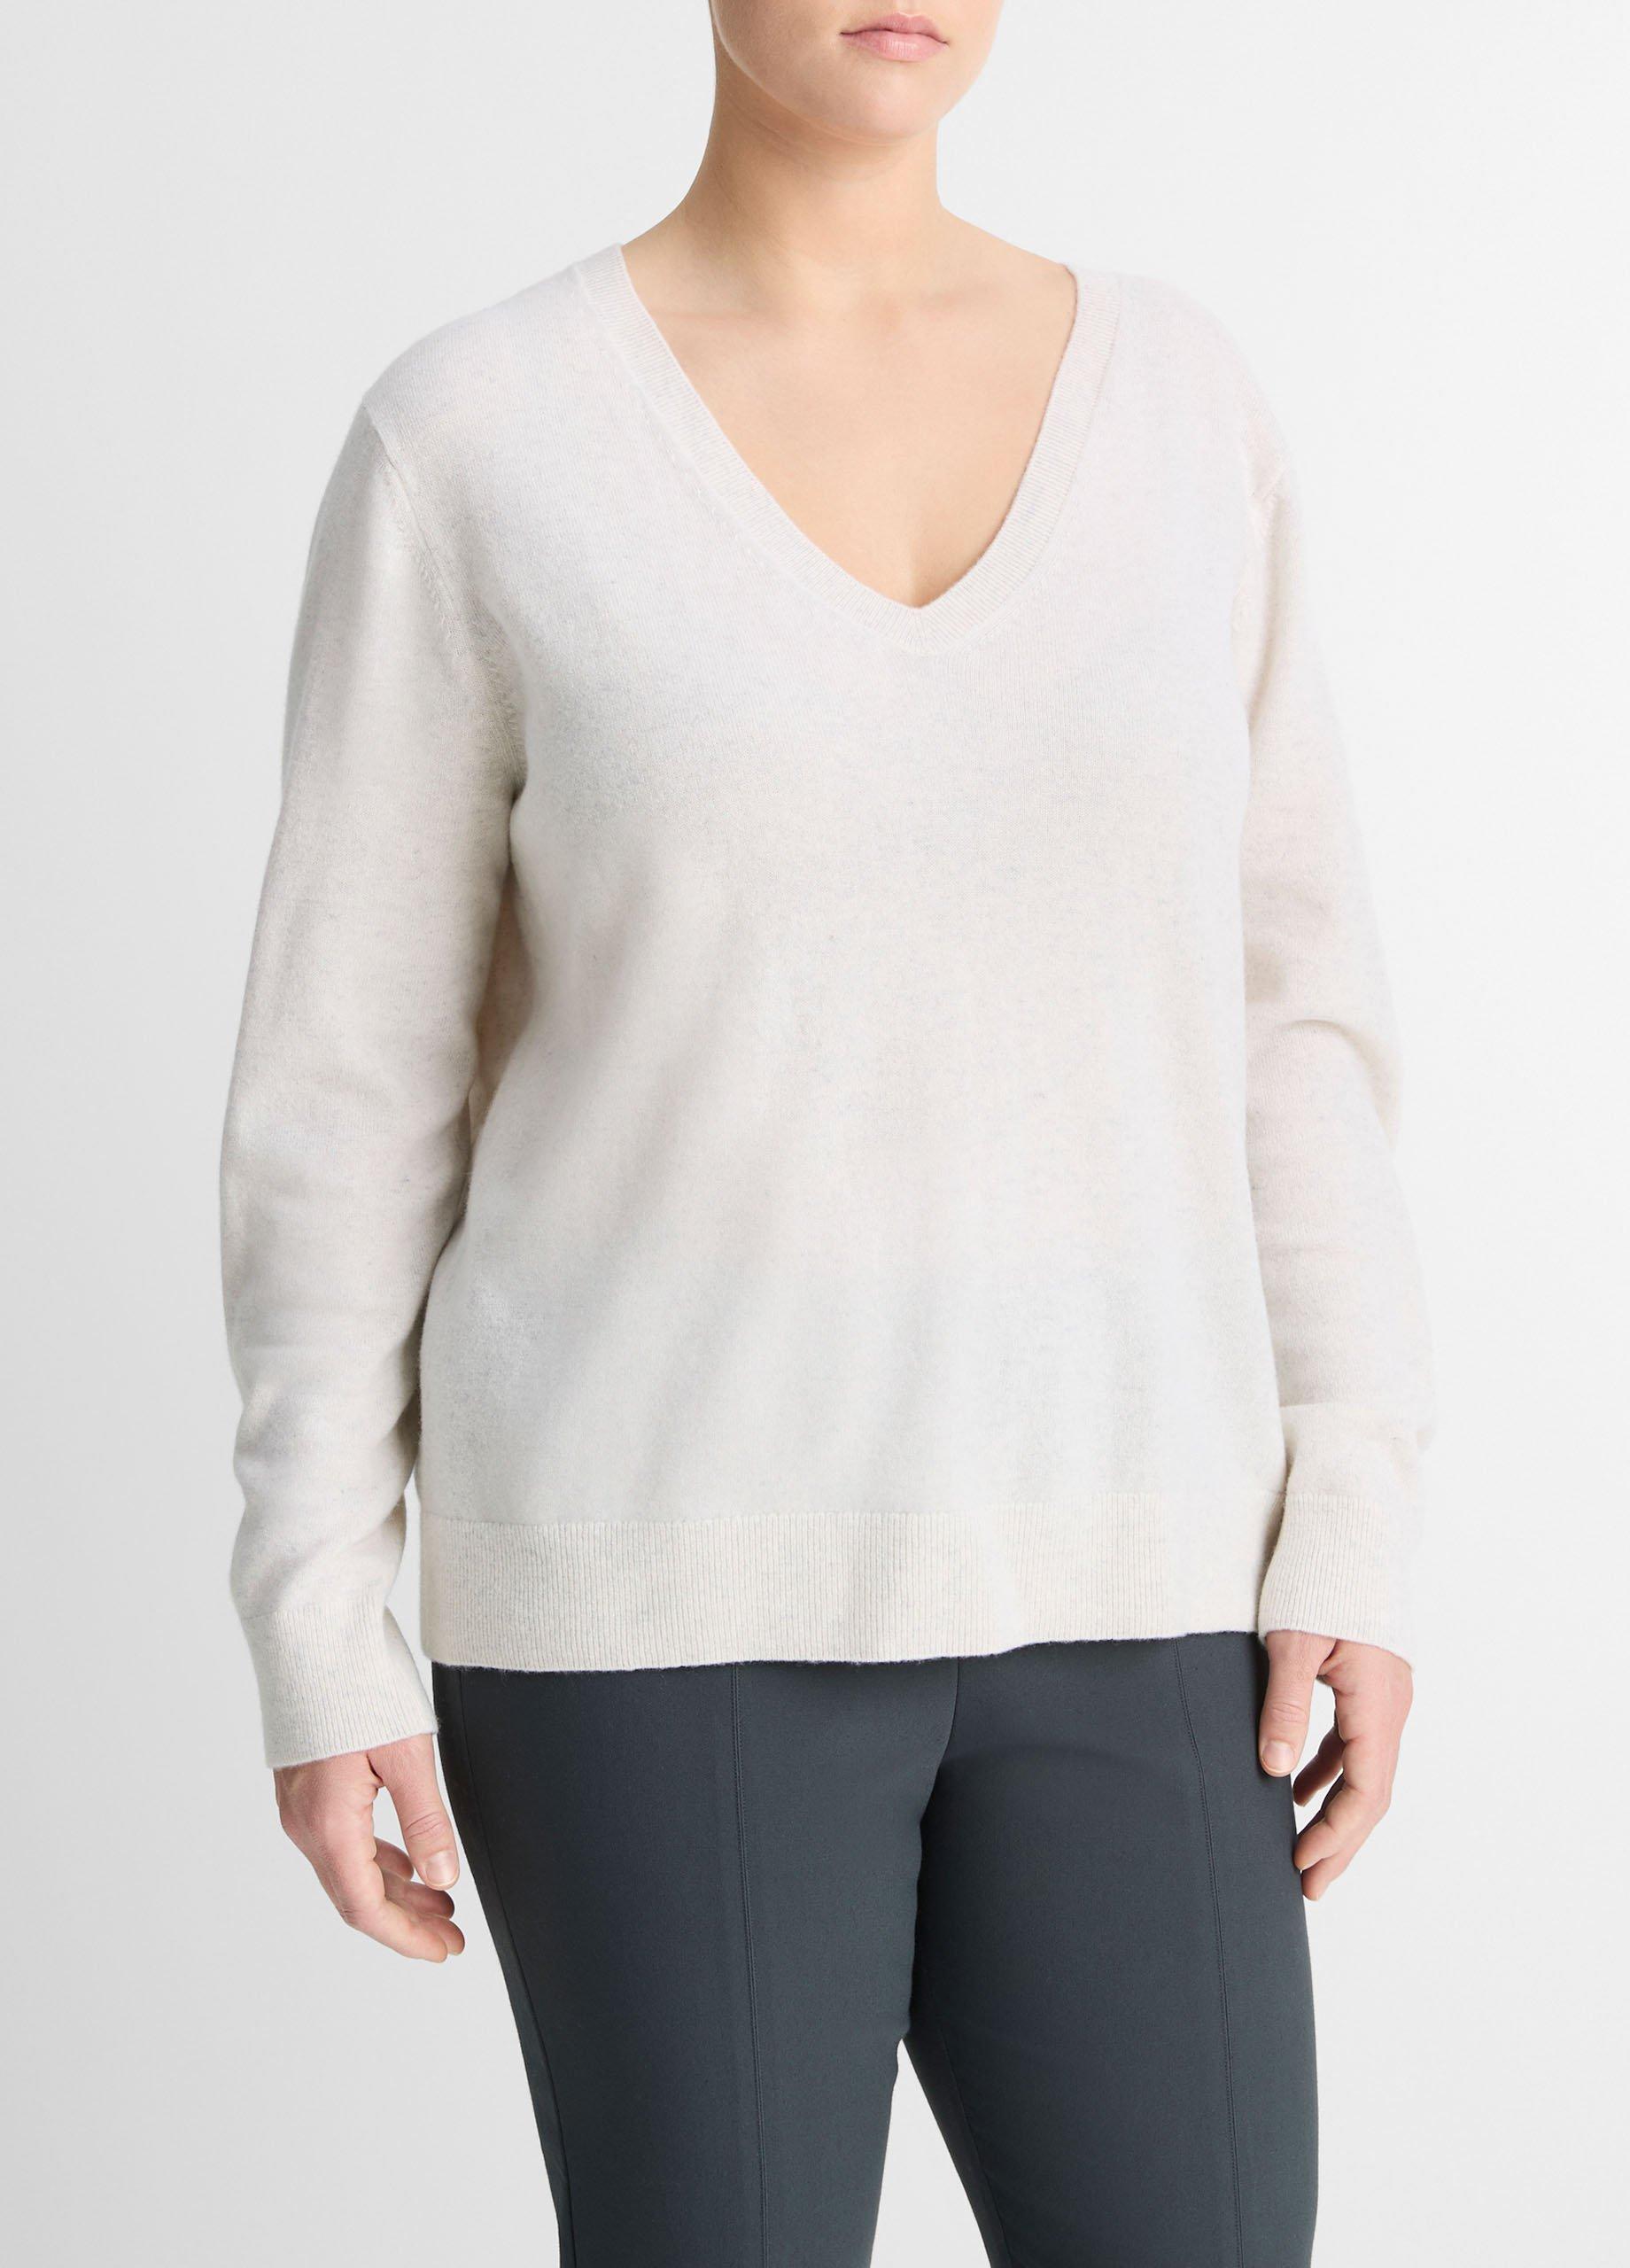 Cashmere Weekend V-Neck Sweater in Extended Sizes